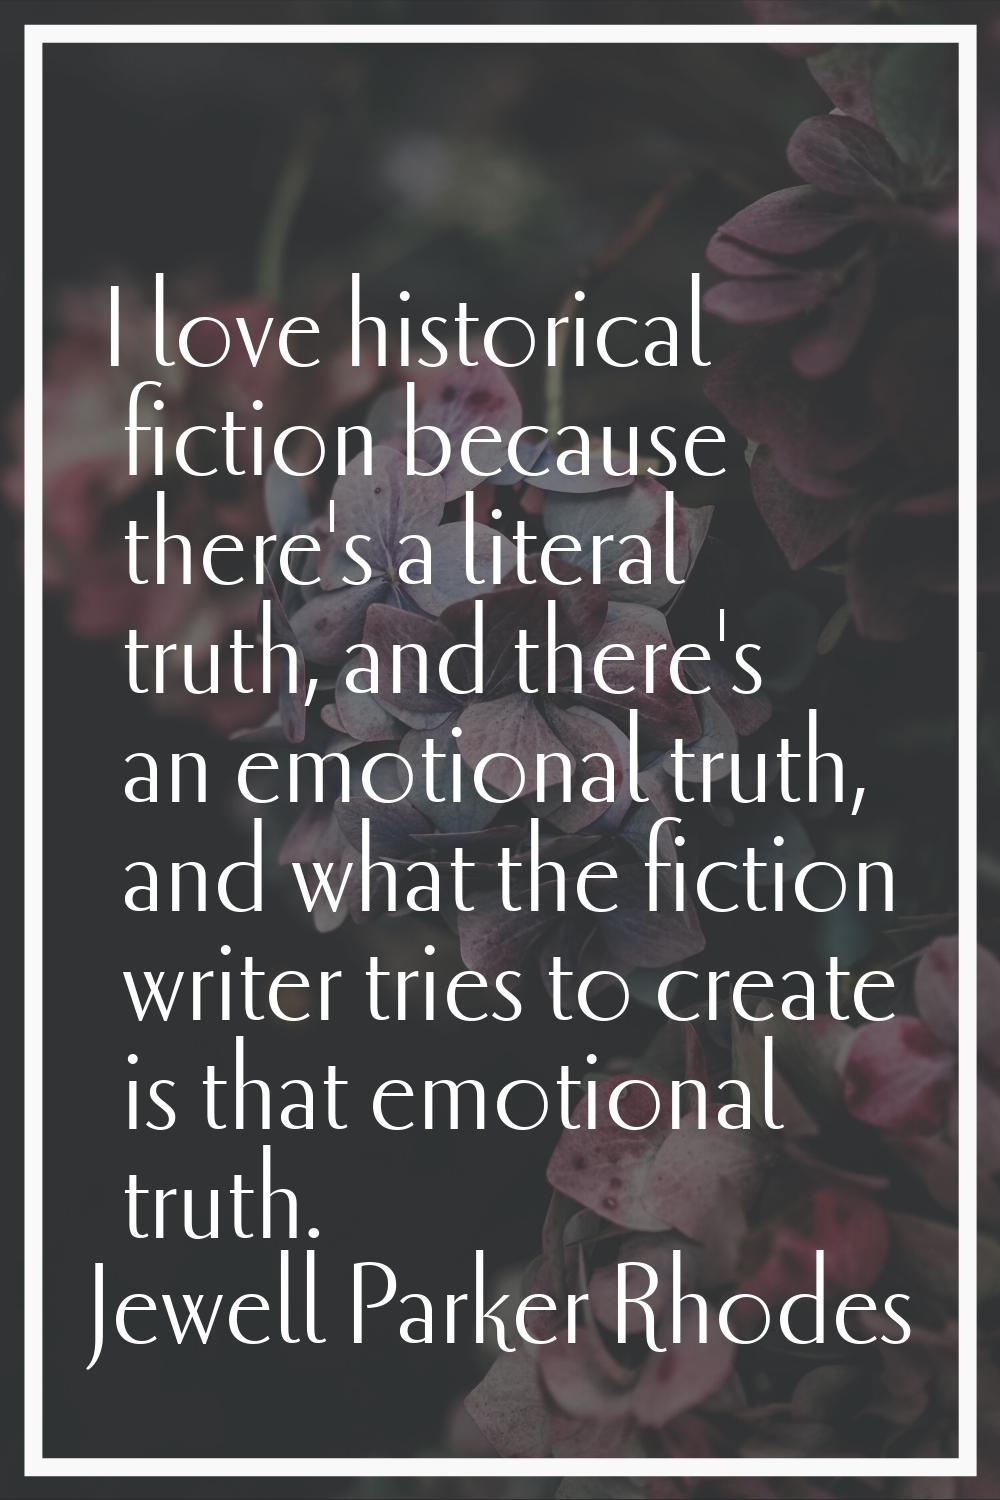 I love historical fiction because there's a literal truth, and there's an emotional truth, and what